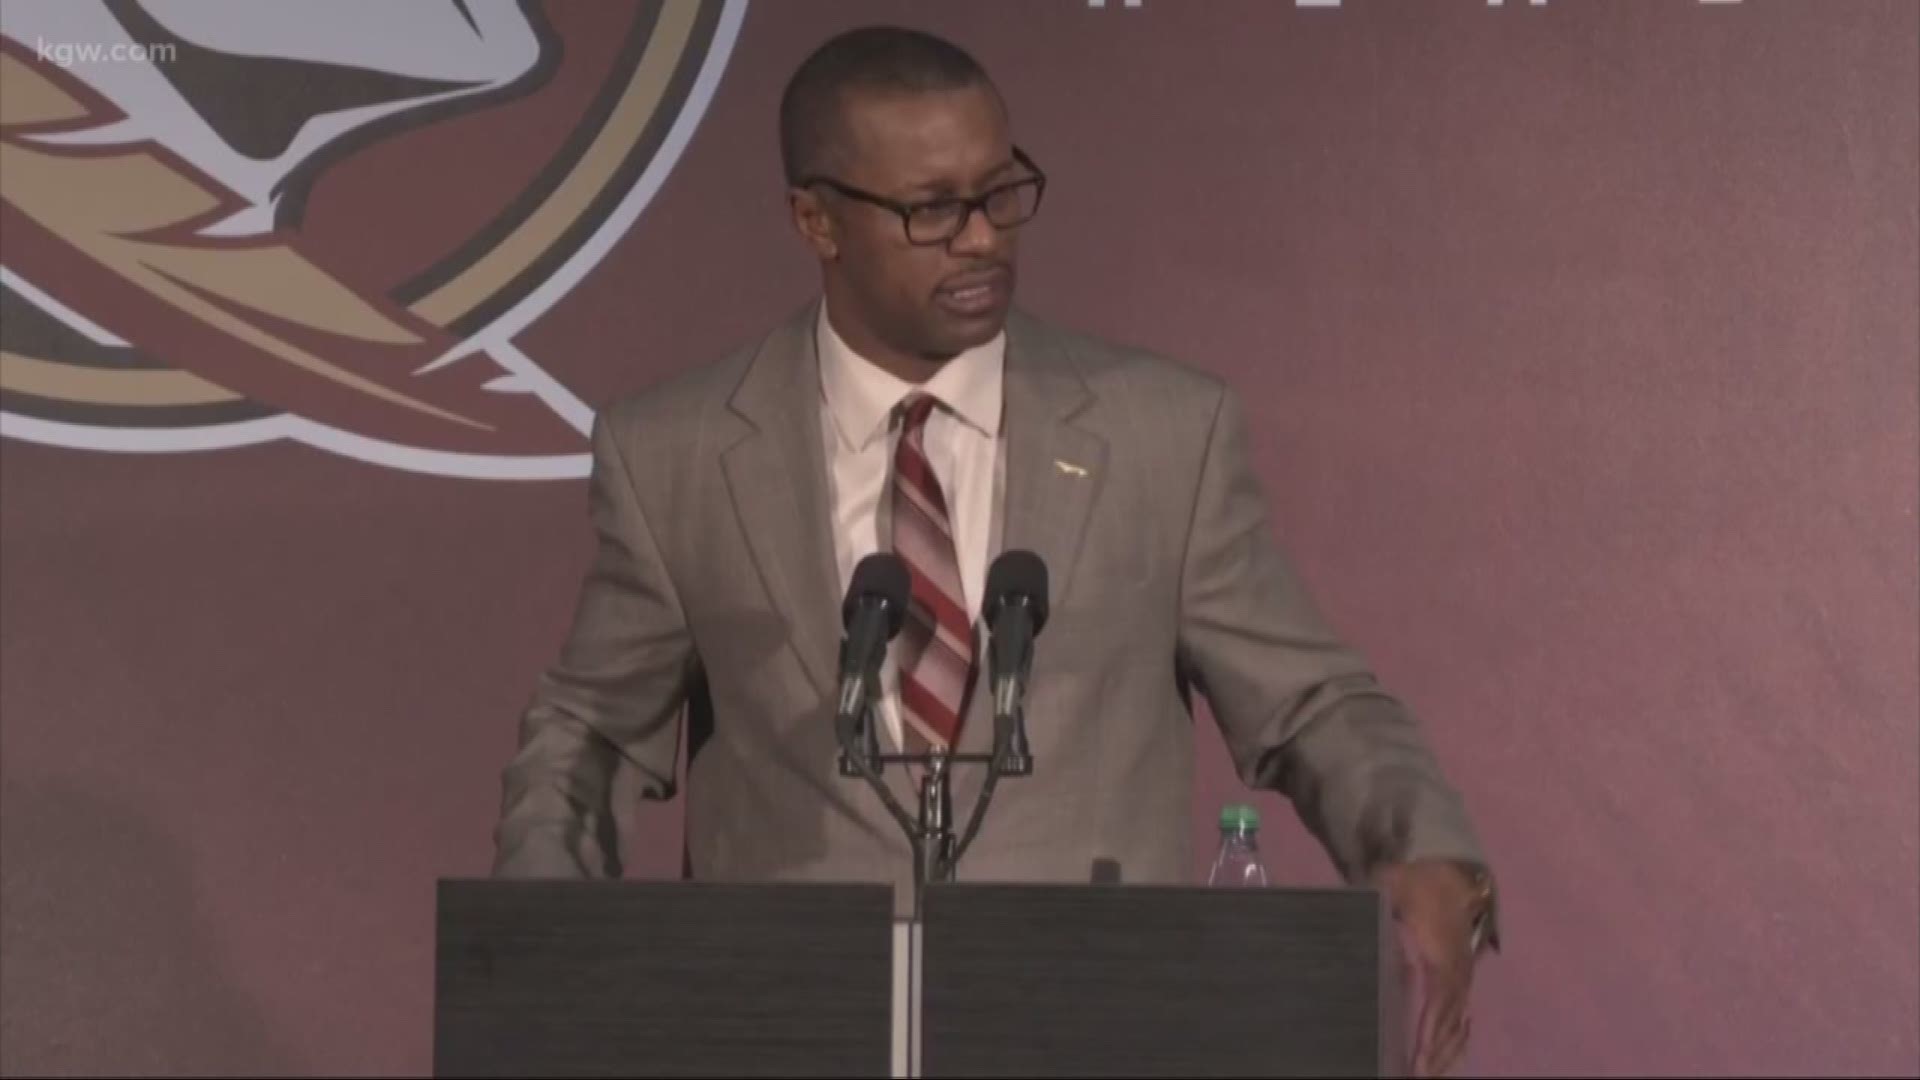 Willie Taggart was introduced as Florida State's new football coach